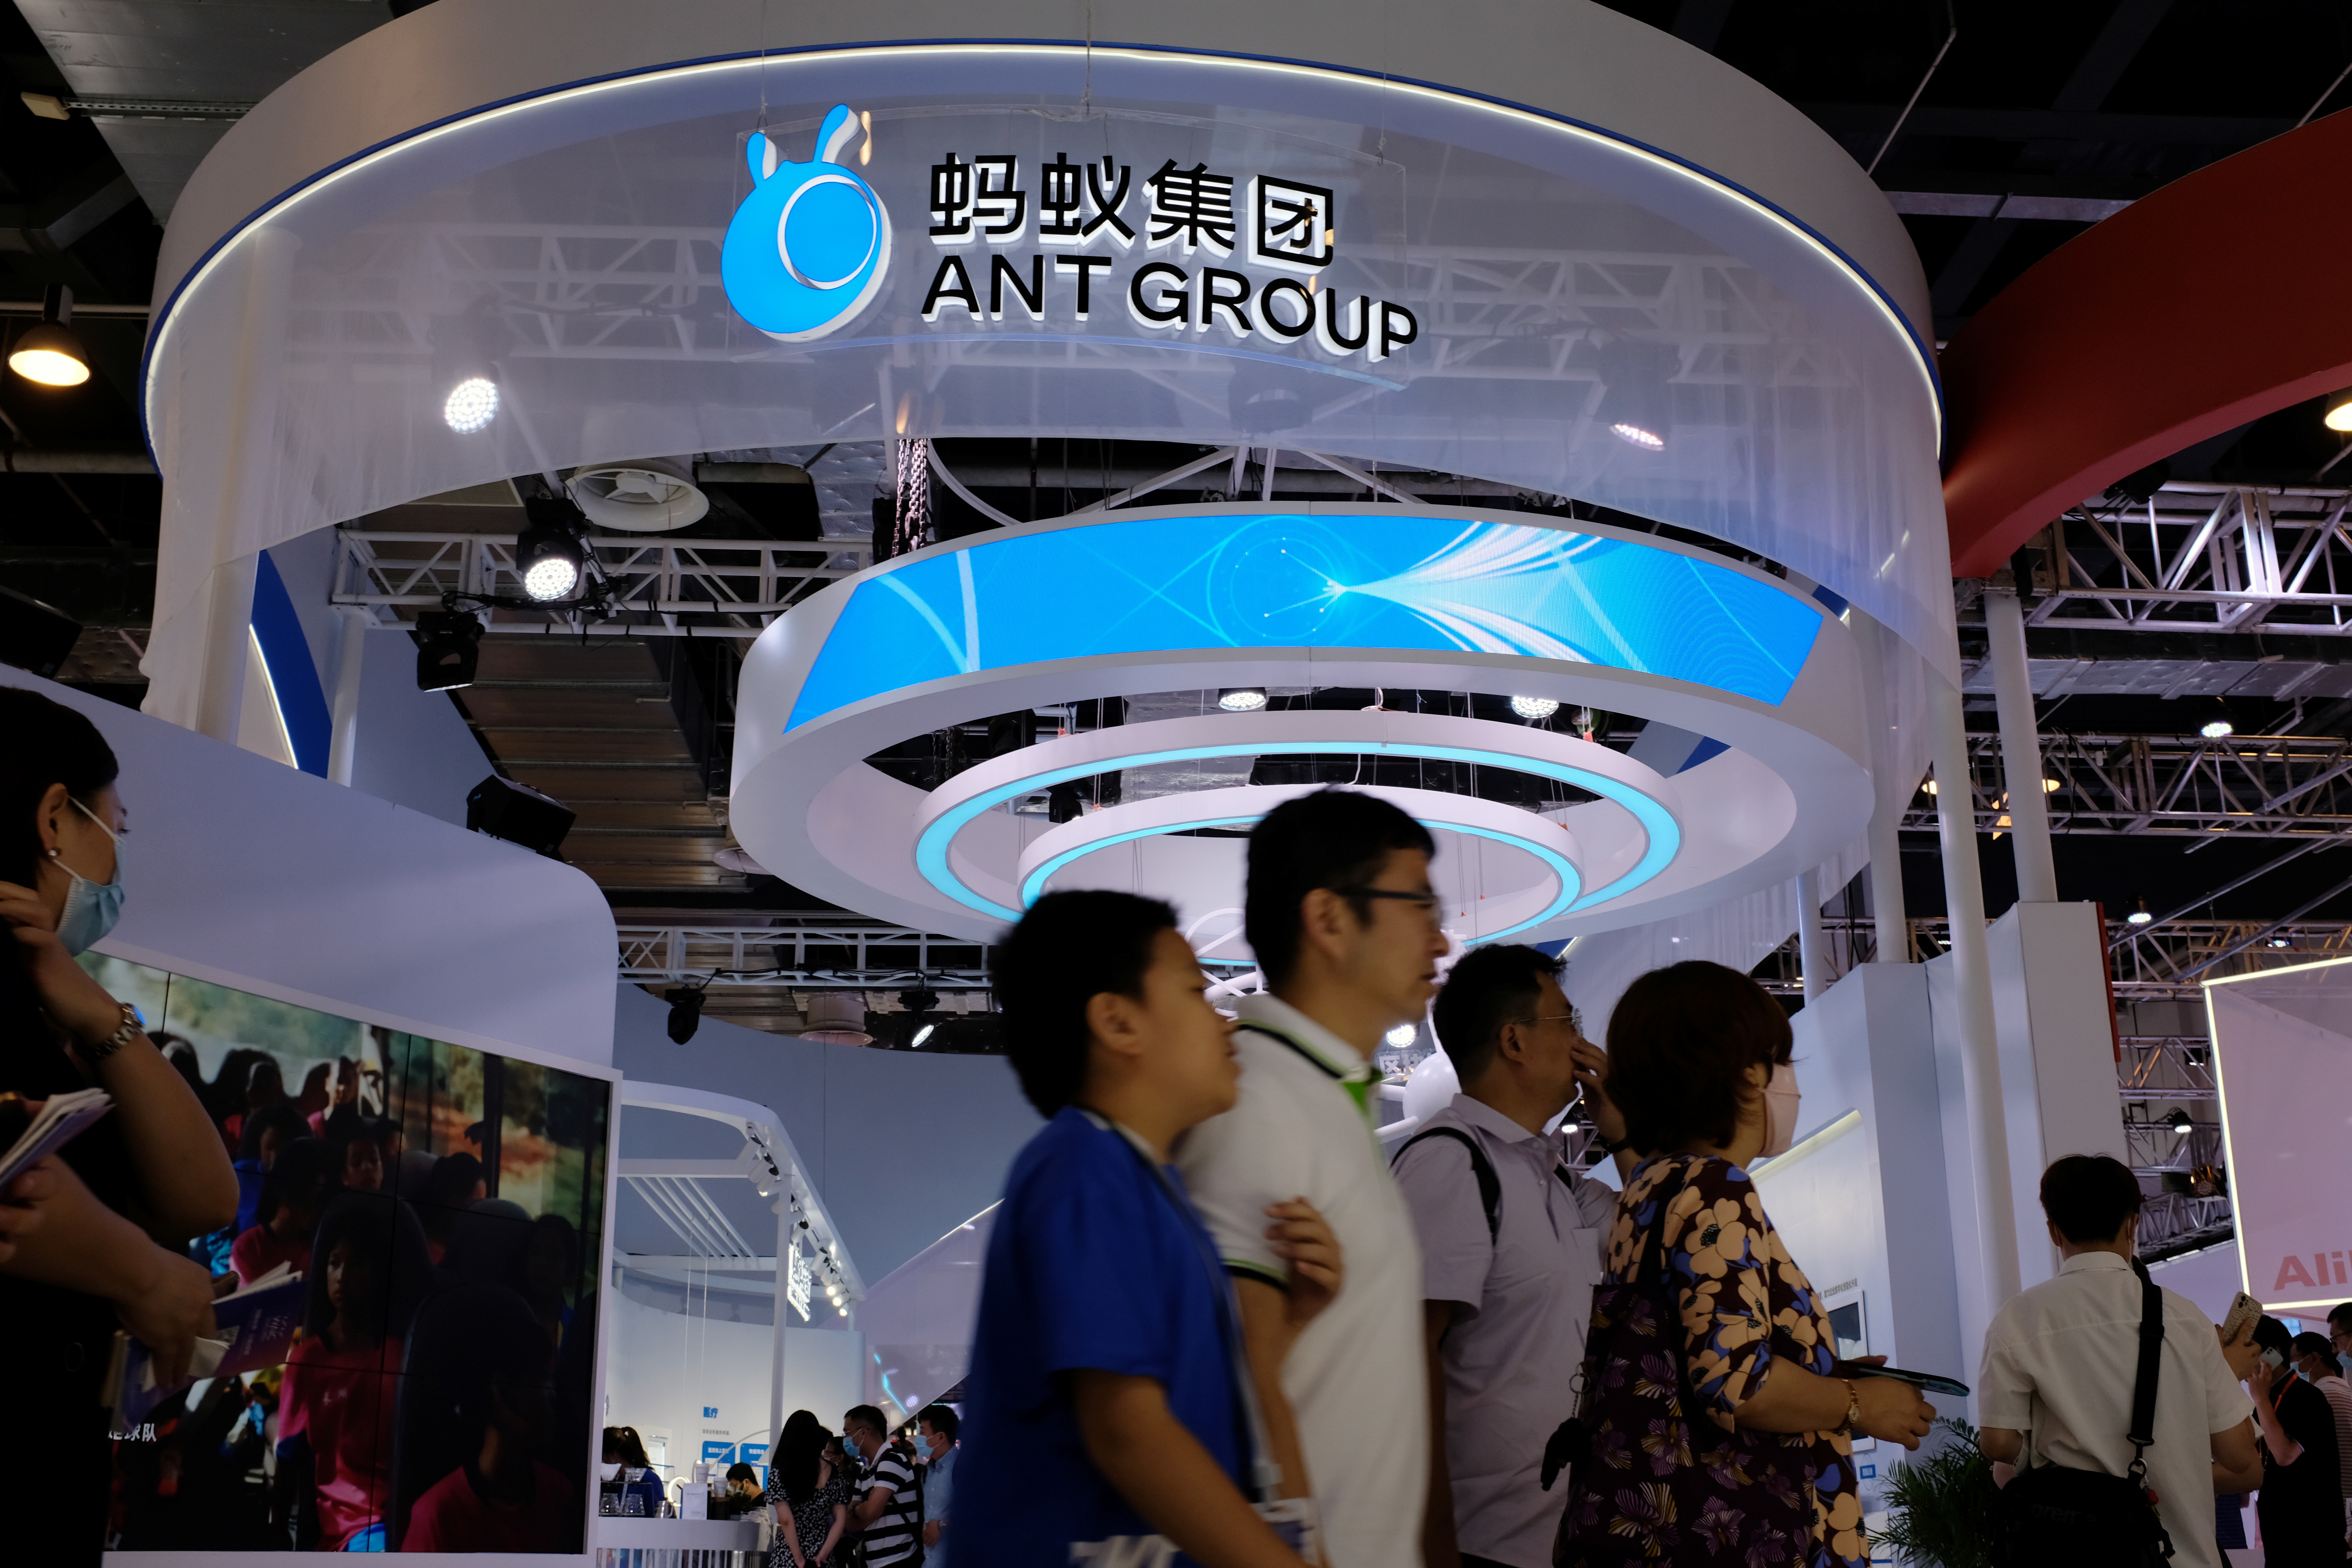 People walk past the Ant Group booth in Shanghai